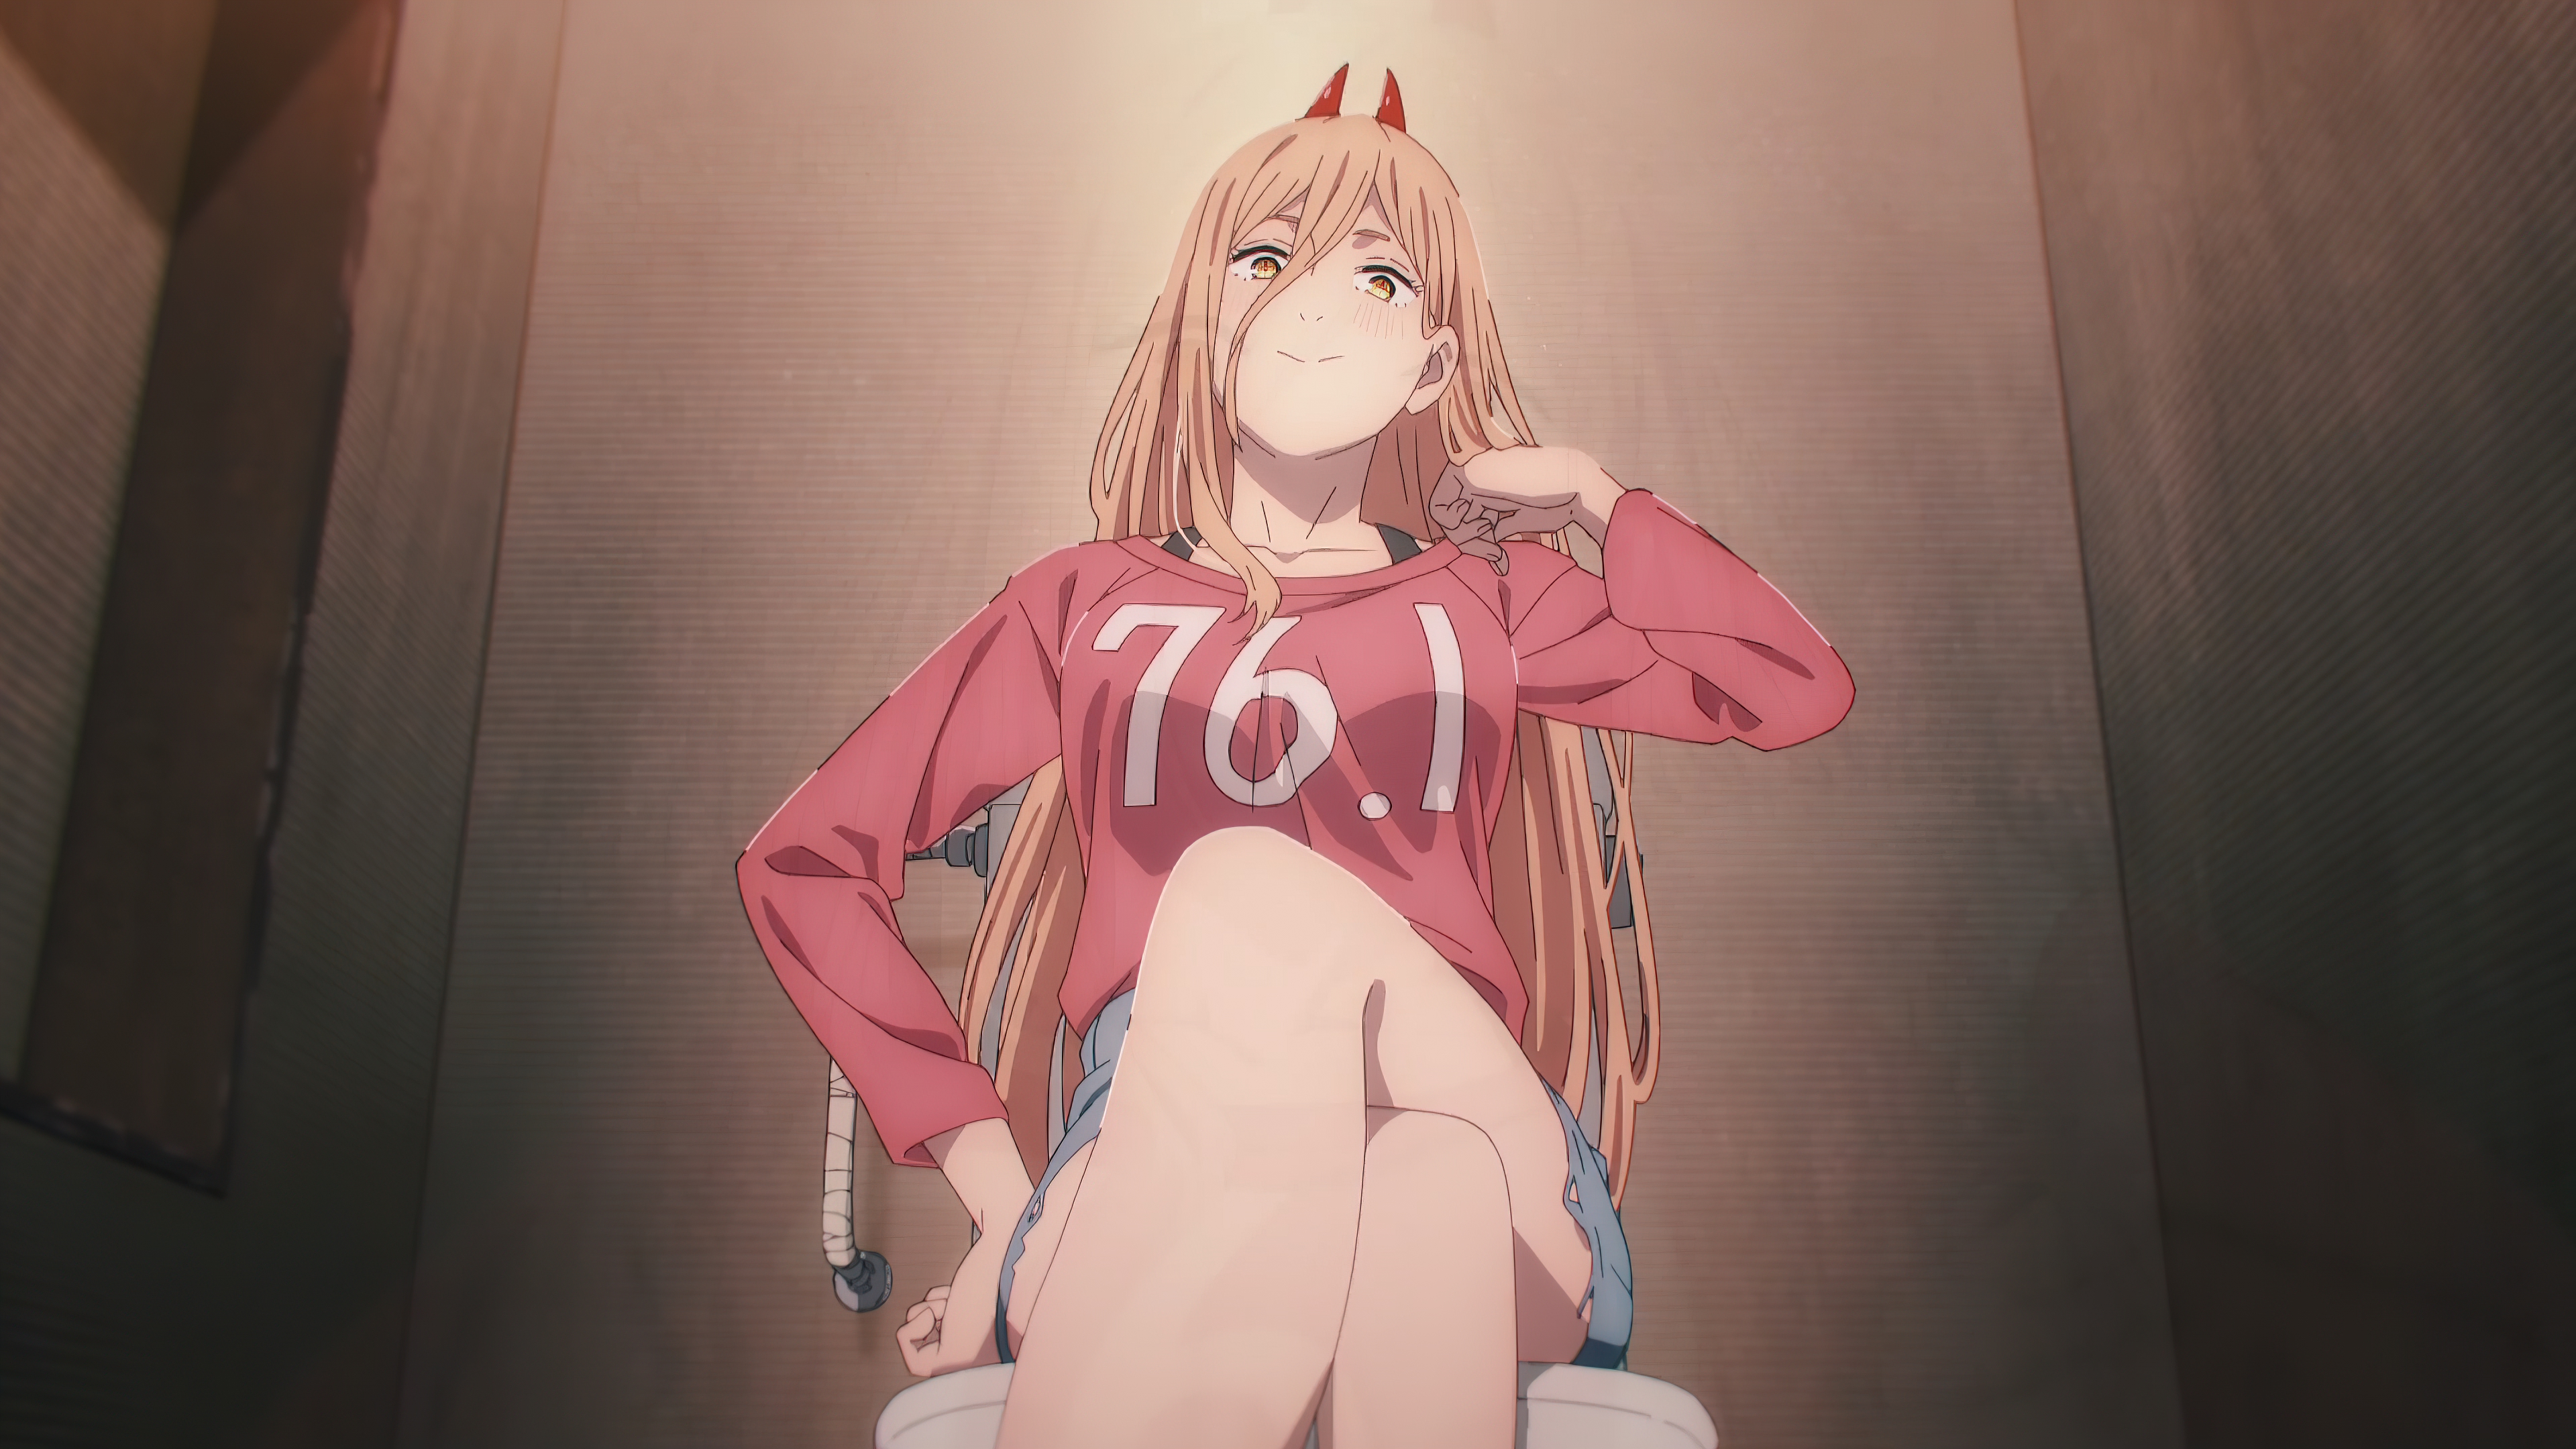 Anime 3840x2160 Chainsaw Man anime 4K frontal view low-angle Power (Chainsaw Man) Anime screenshot anime girls legs crossed